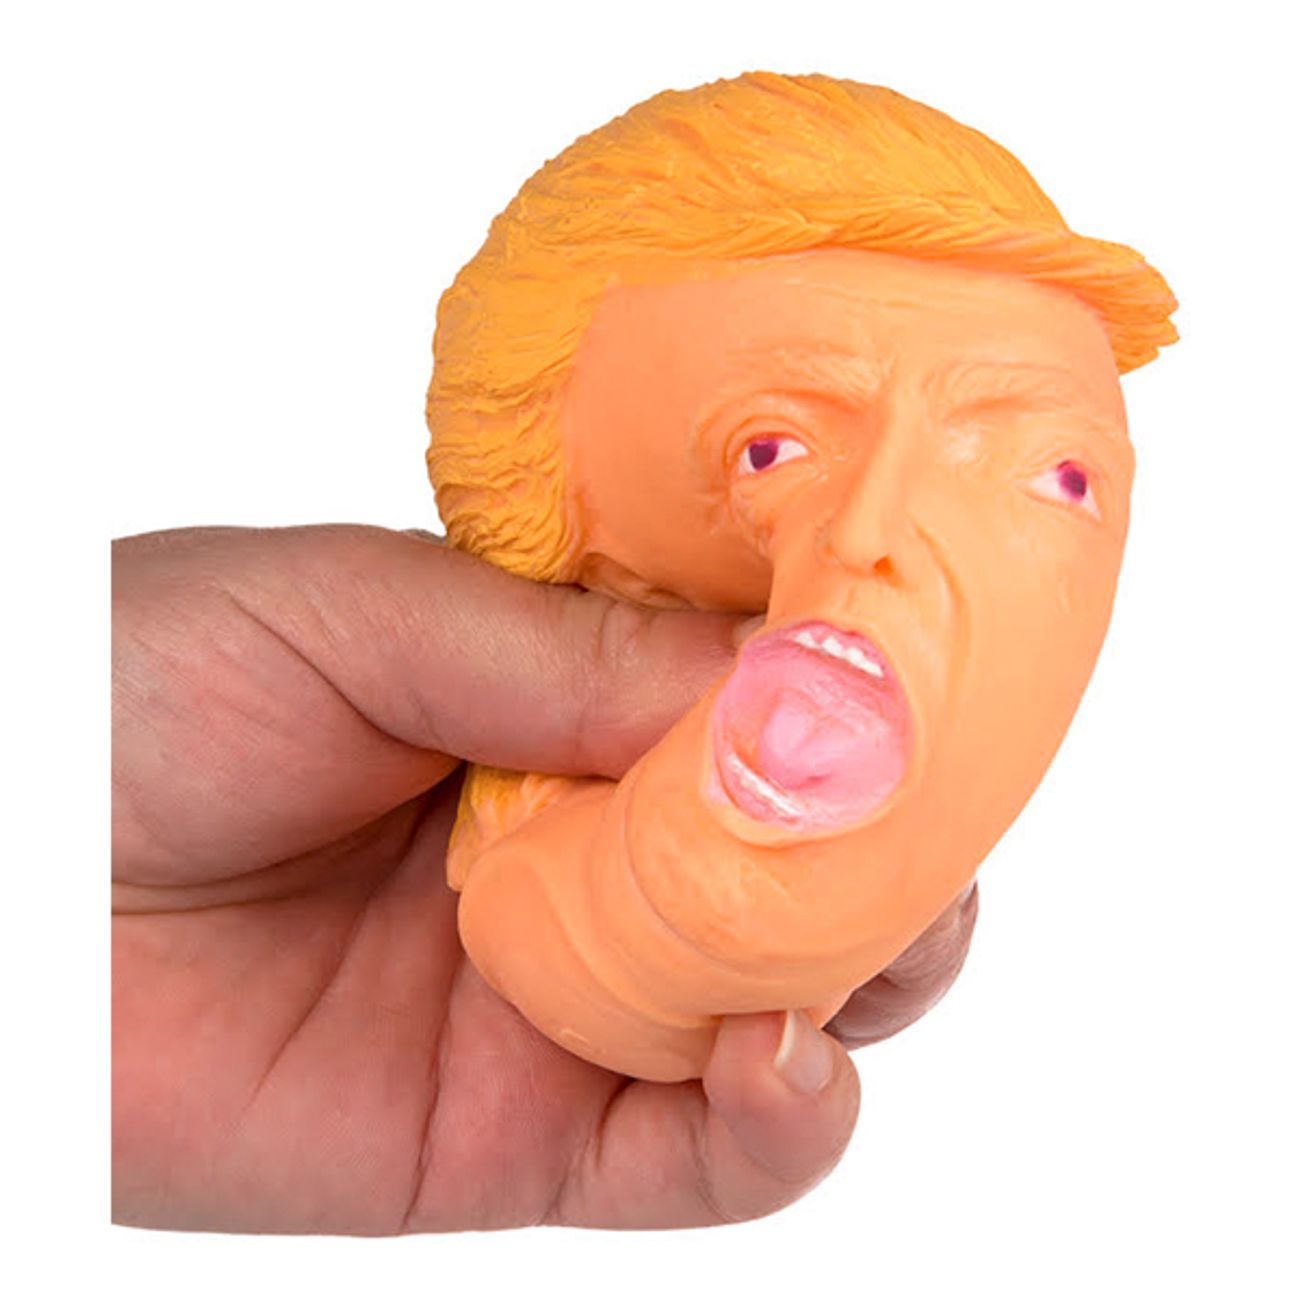 trump-squeeze-ball-1